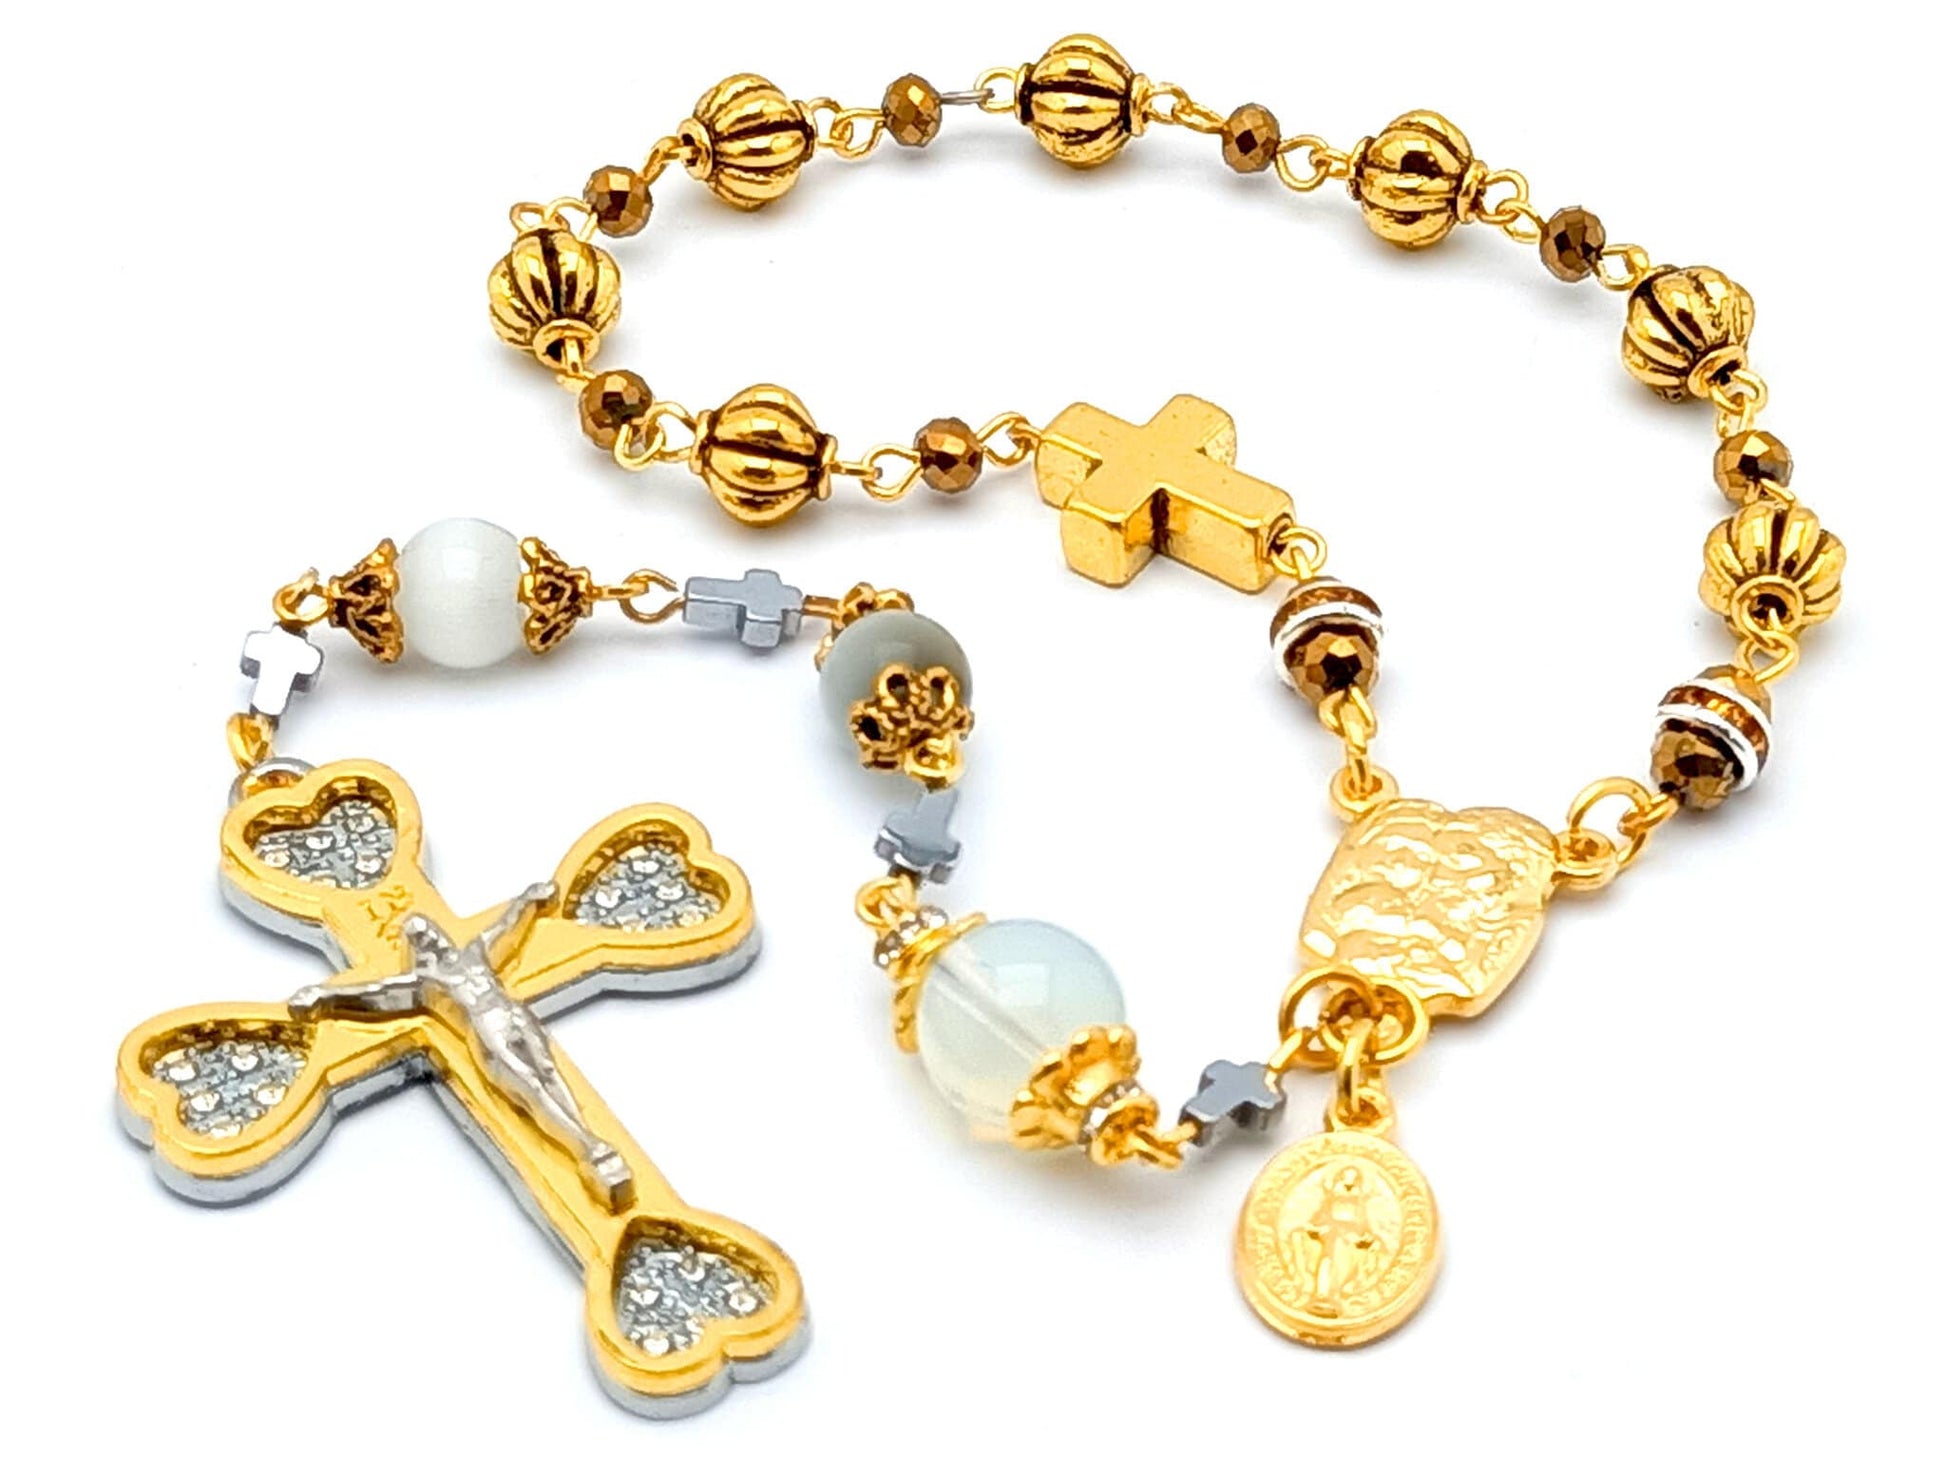 Our Lady of Sorrows unique rosary beads dolor rosary with golden and opal beads, Holy Spirit centre and gold heart crucifix.